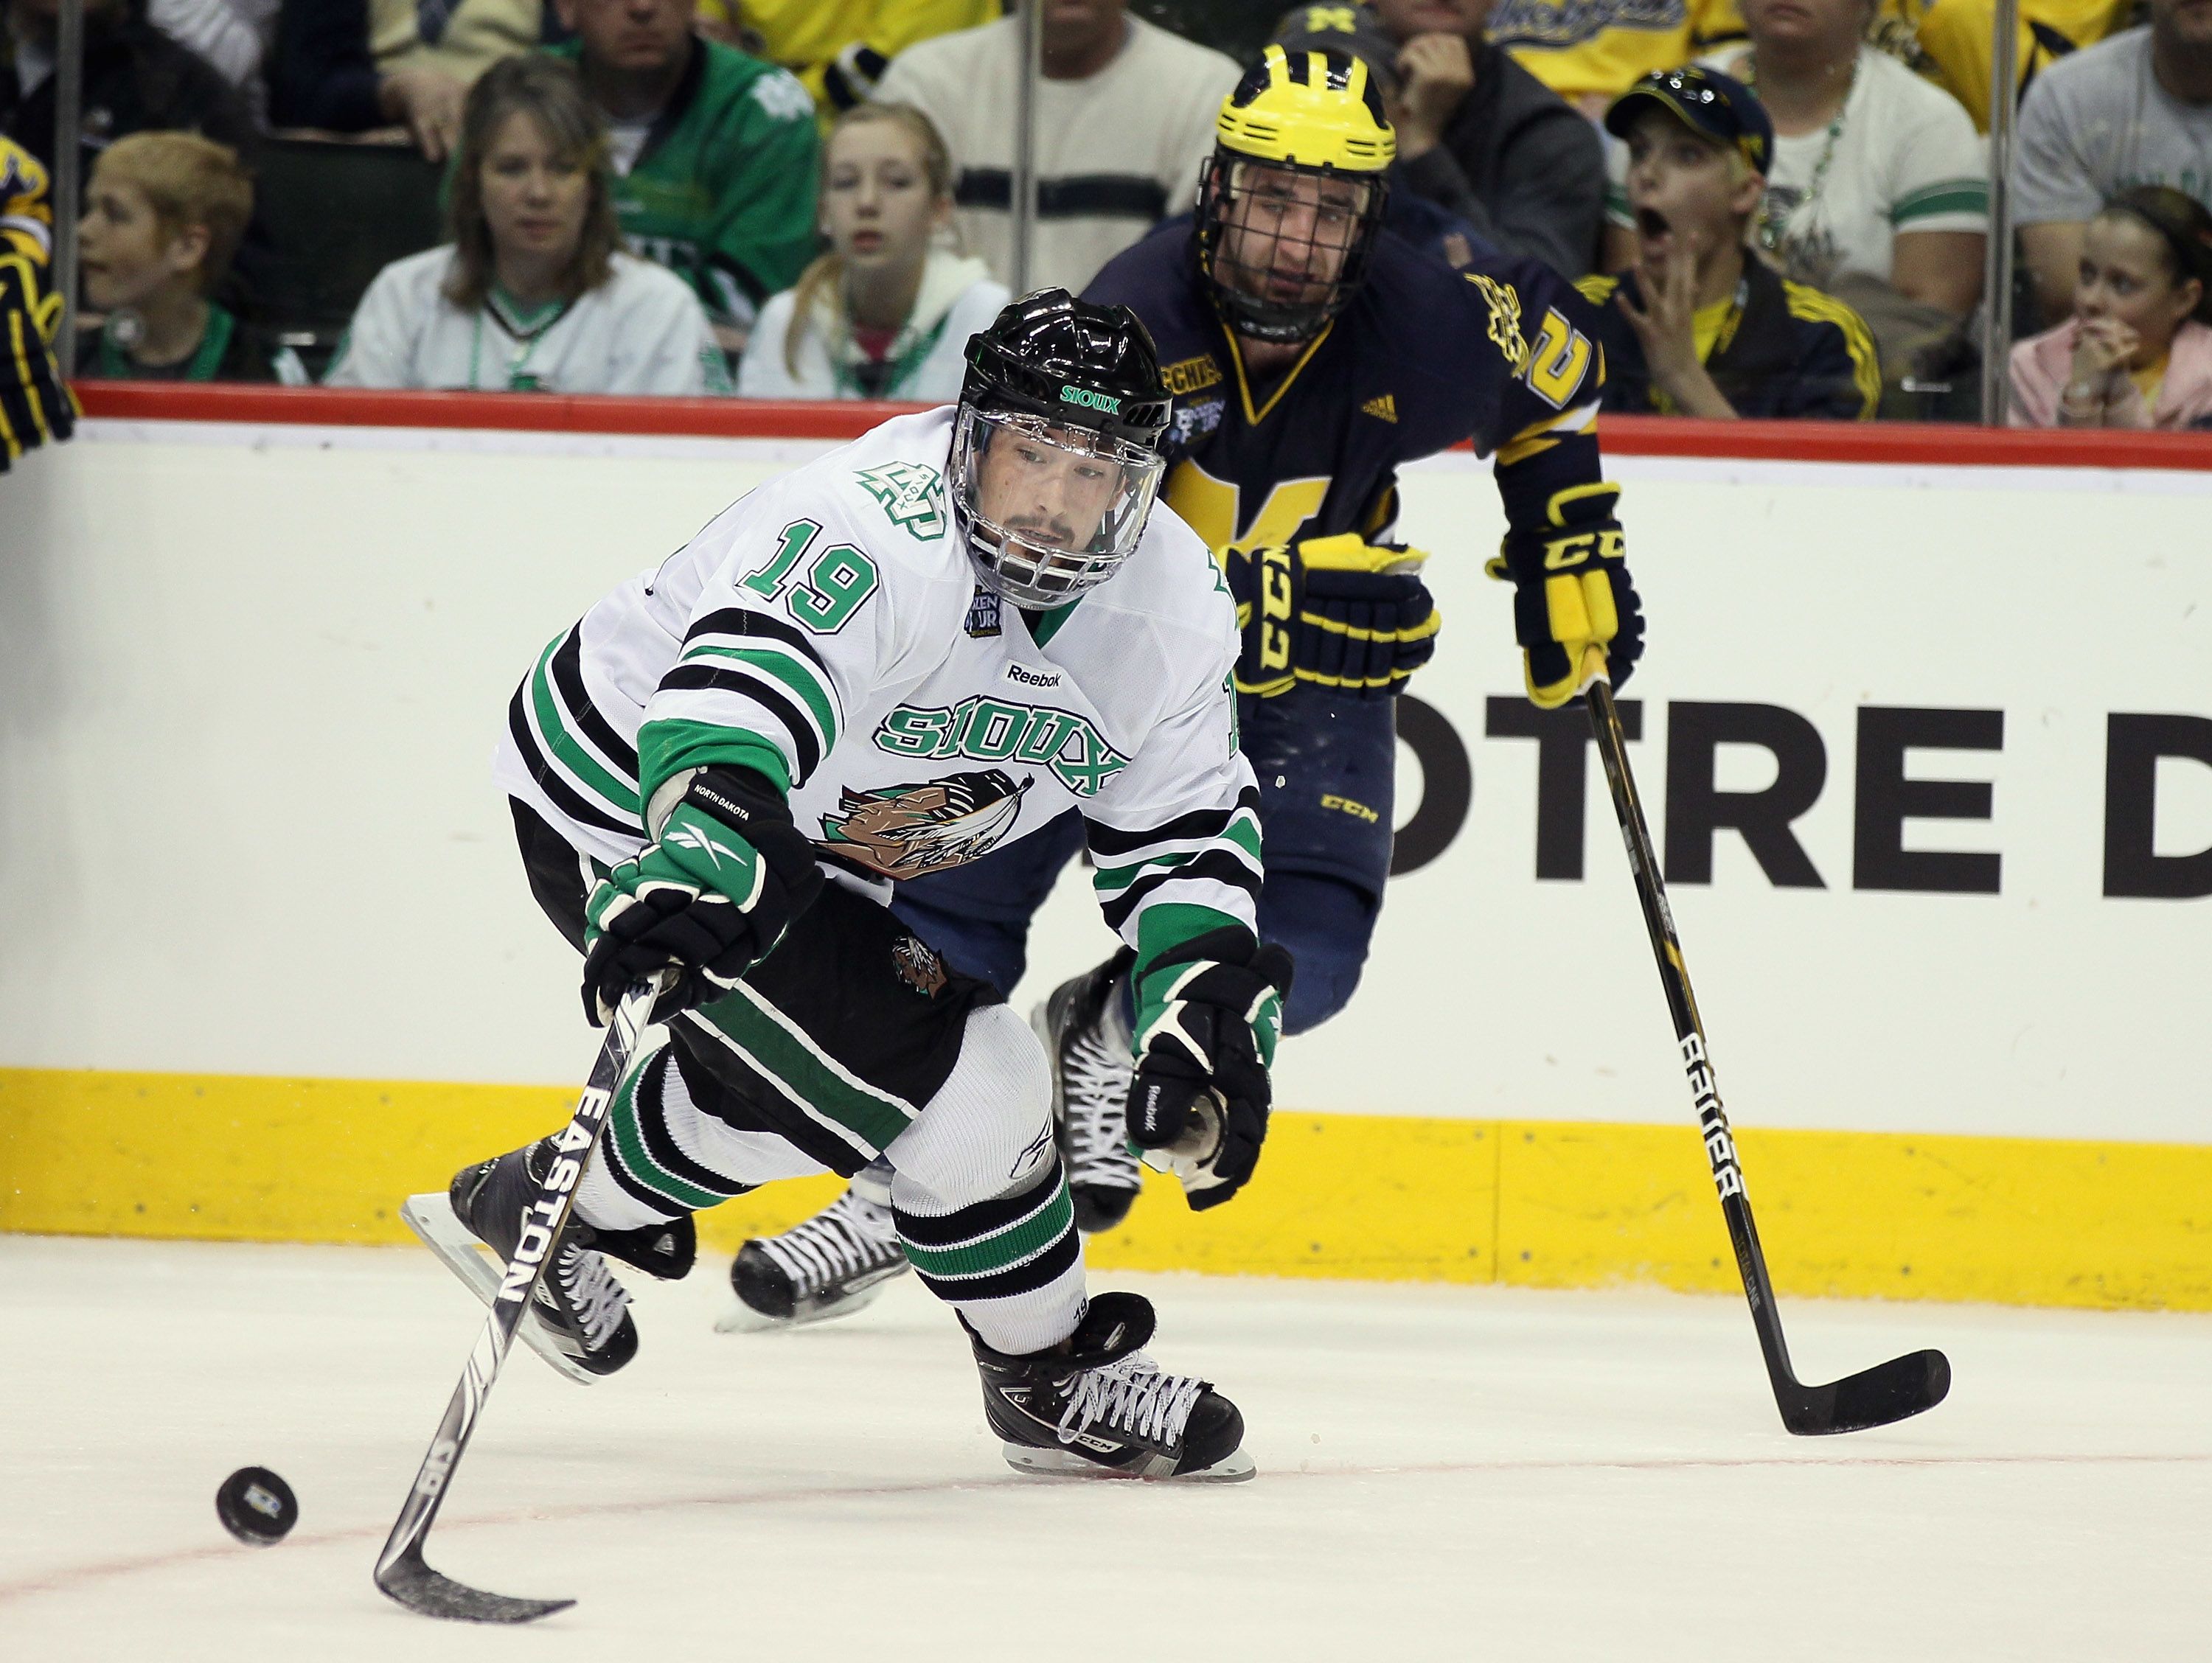 North Dakota Needs a Nickname (And No, 'Fighting Sioux' Won't Do